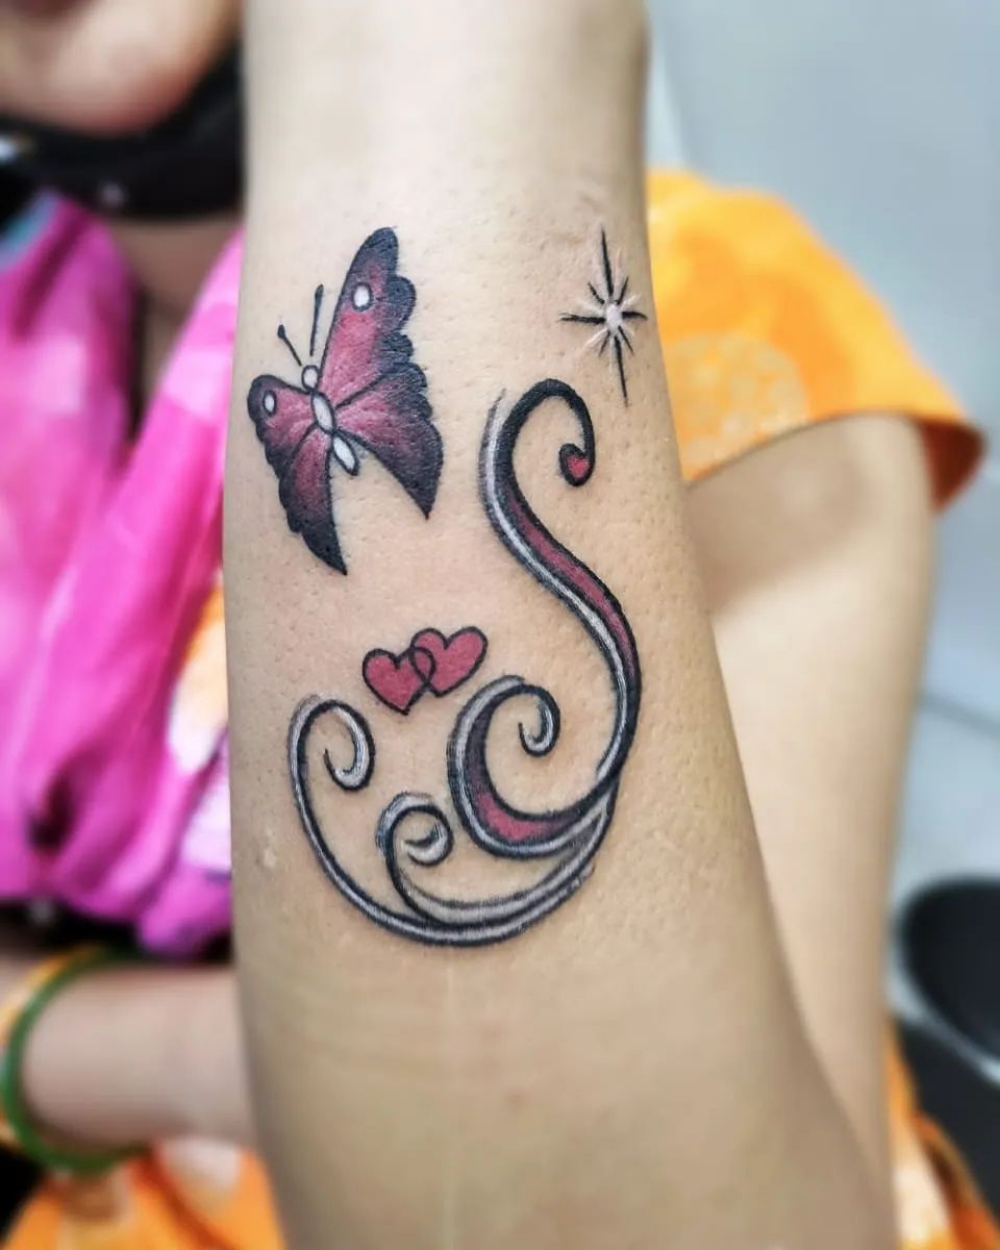 S letter tattoo with peacock feather done at xpose tattoos jaipur